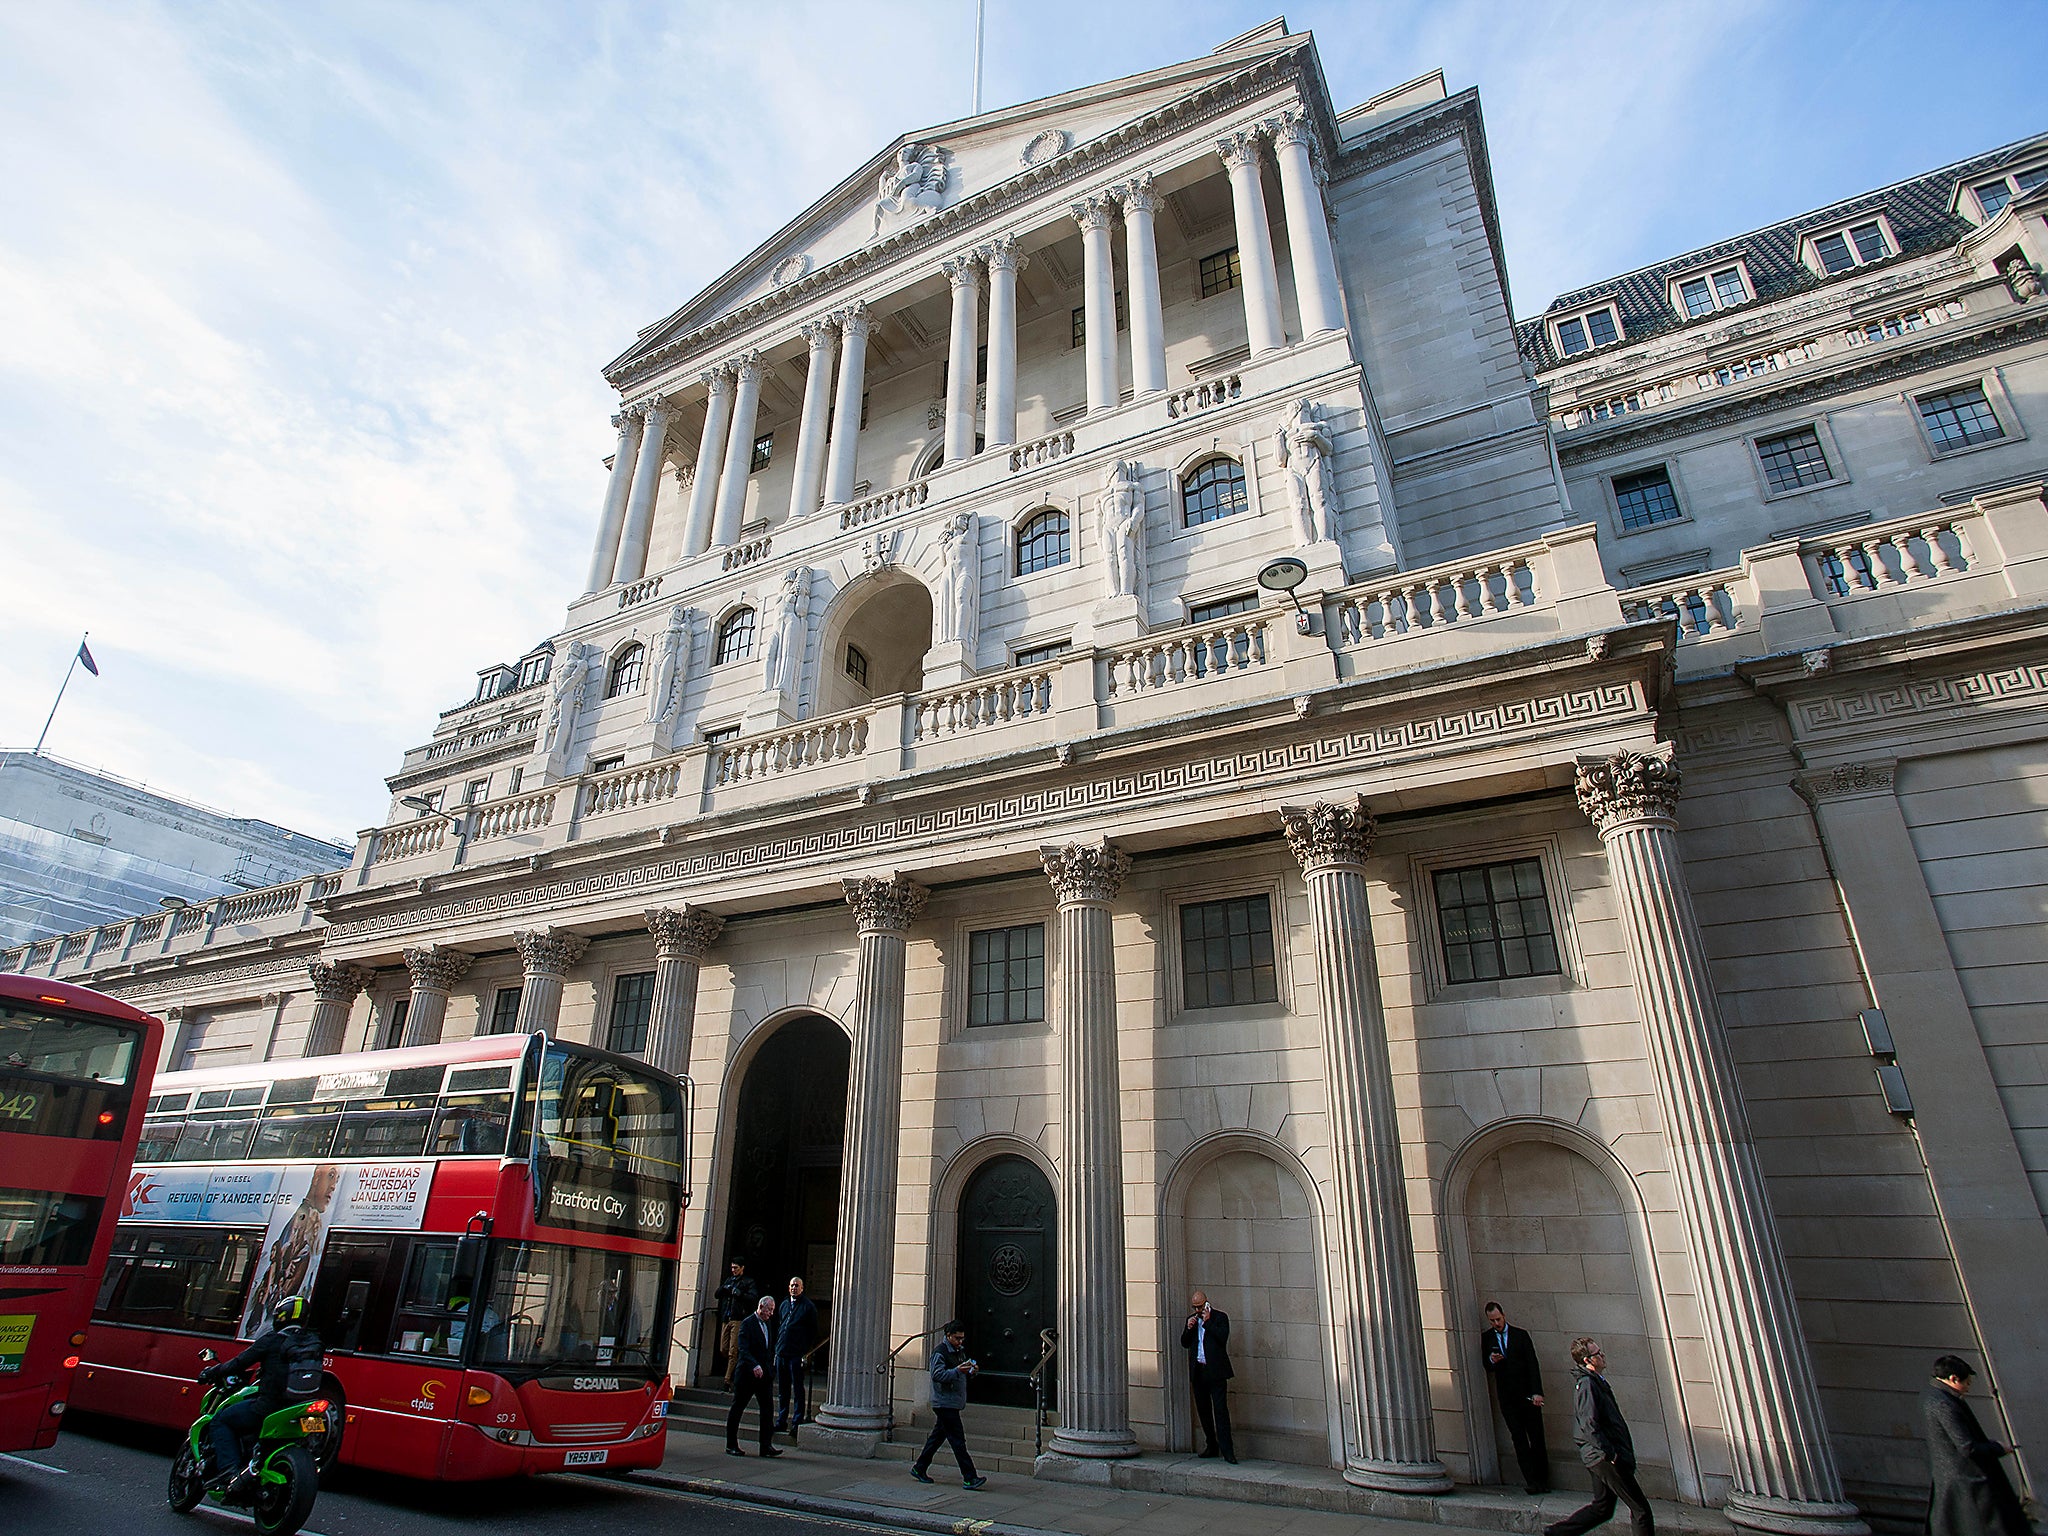 The Bank of England says productivity growth must precede wage rises. But is this always right?